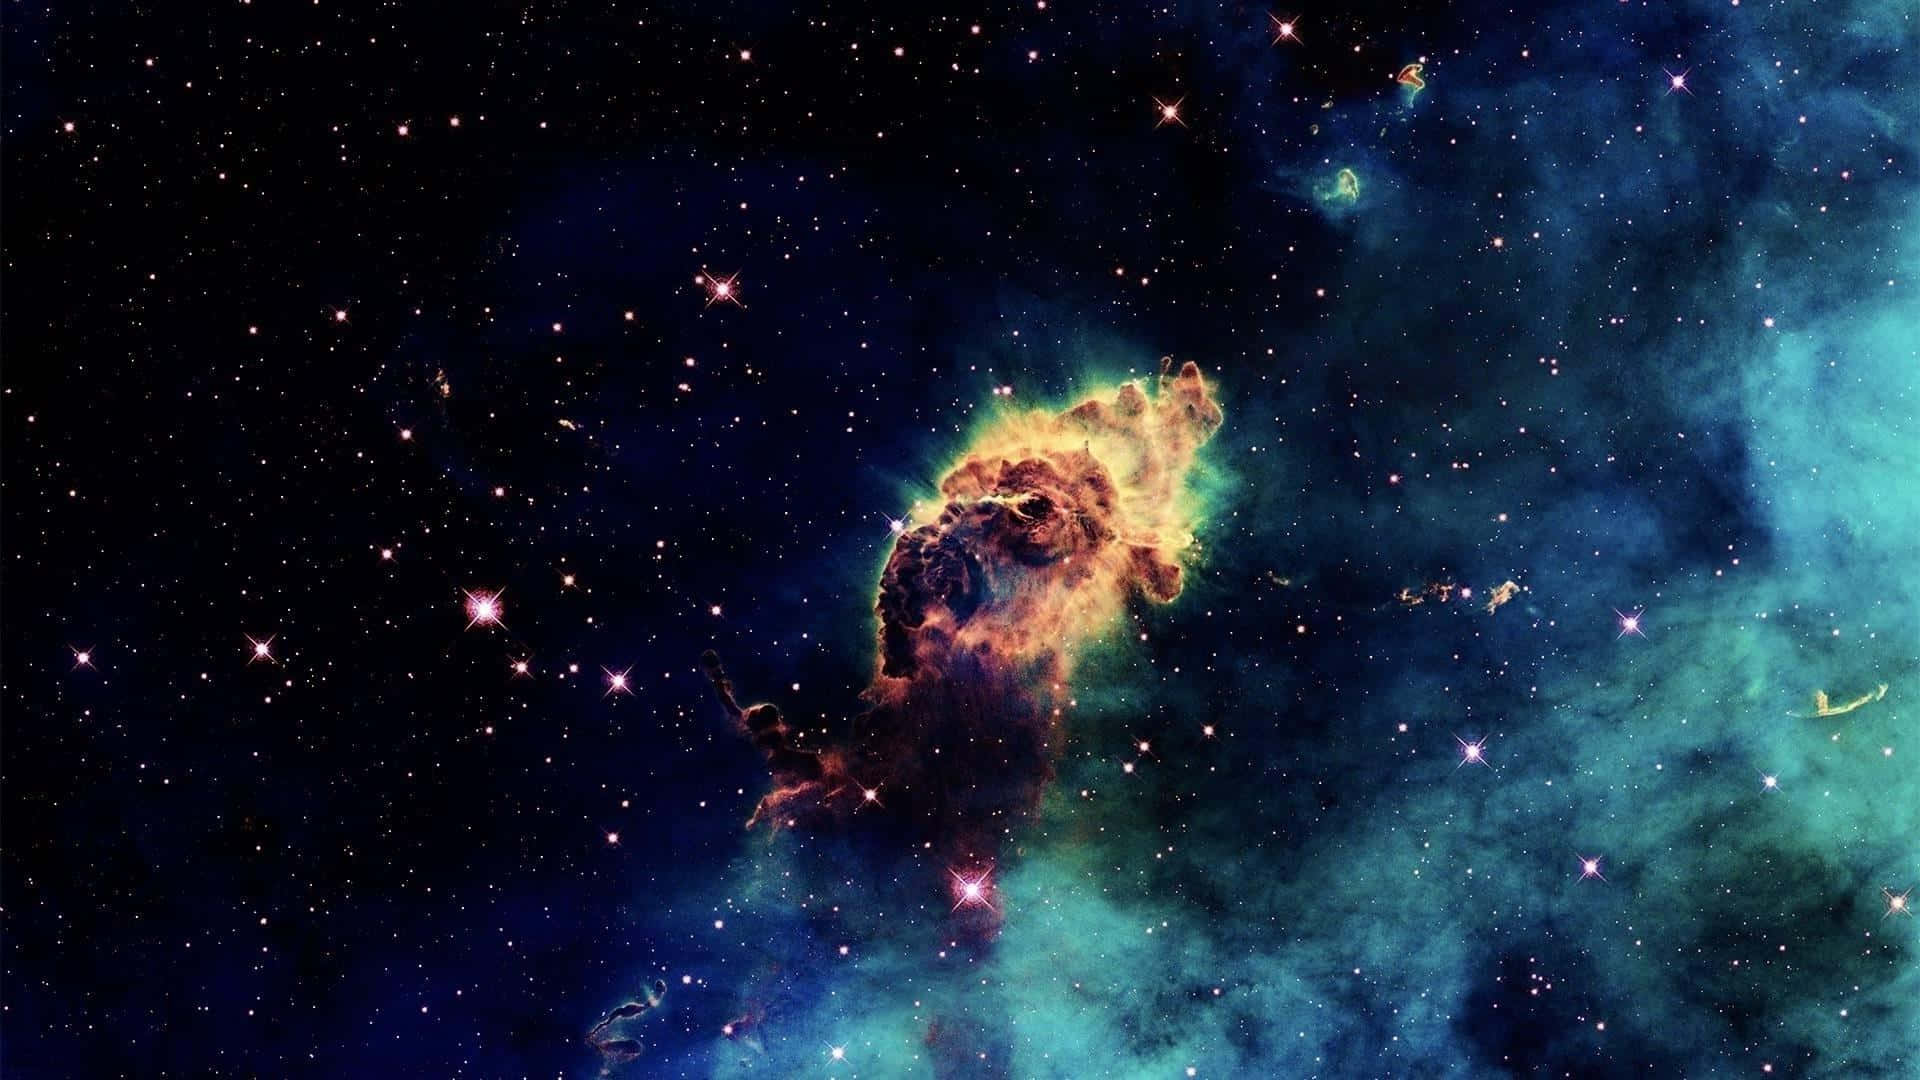 “Exploring the stunning and enigmatic space nebula” Wallpaper